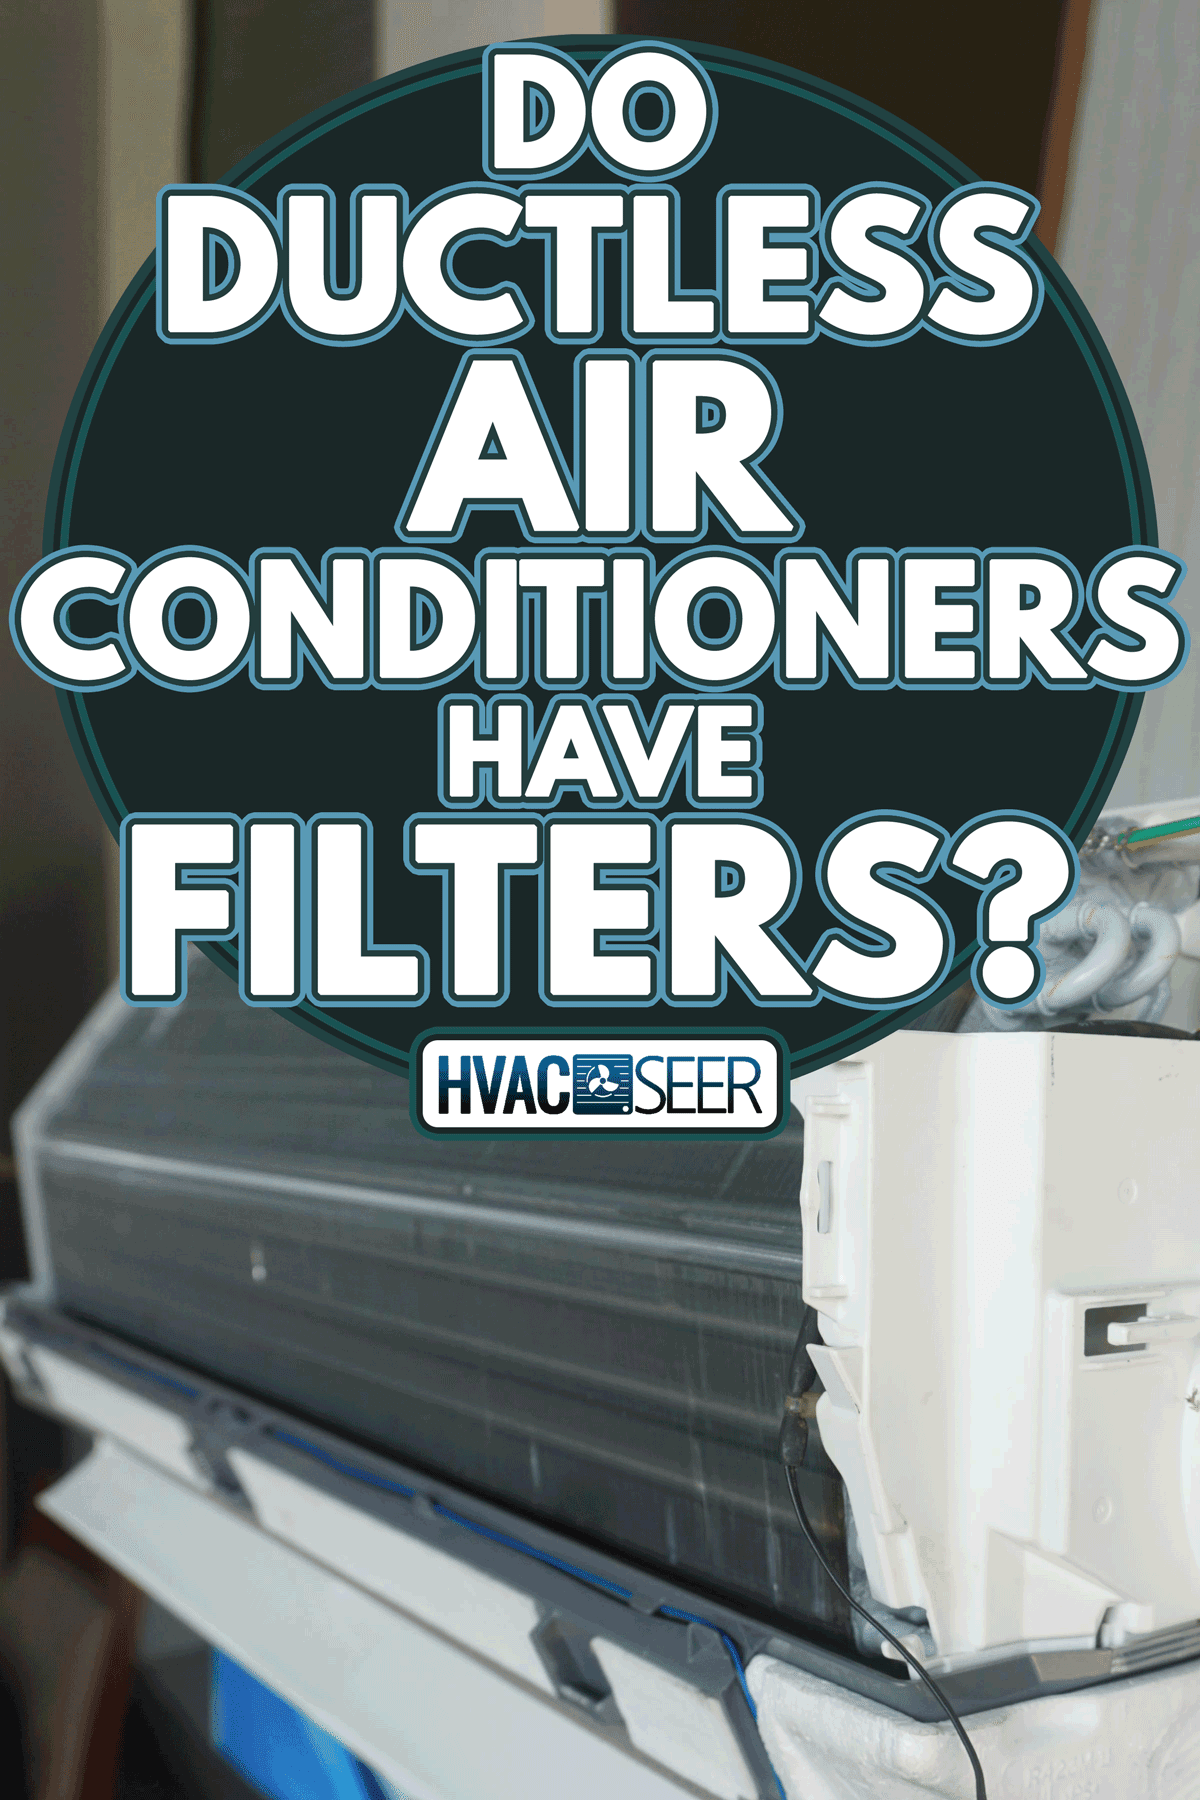 A ductless air conditioner install inside the house, Do Ductless Air Conditioners Have Filters?